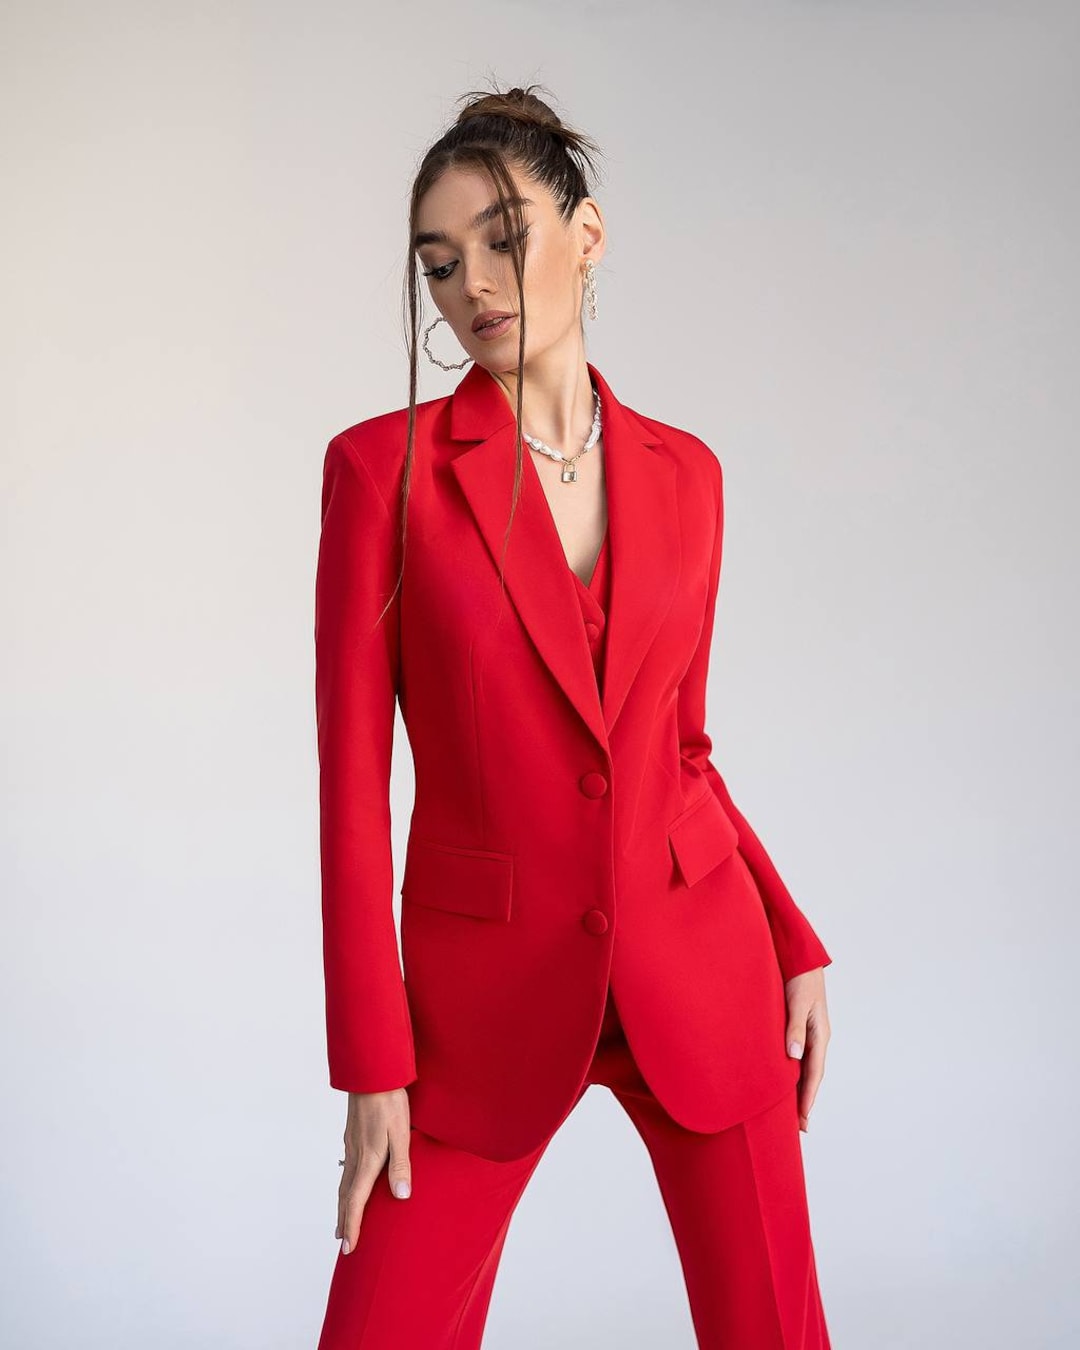 Red Pantsuit for Women, Red Formal Pants Suit Set for Women, Business ...